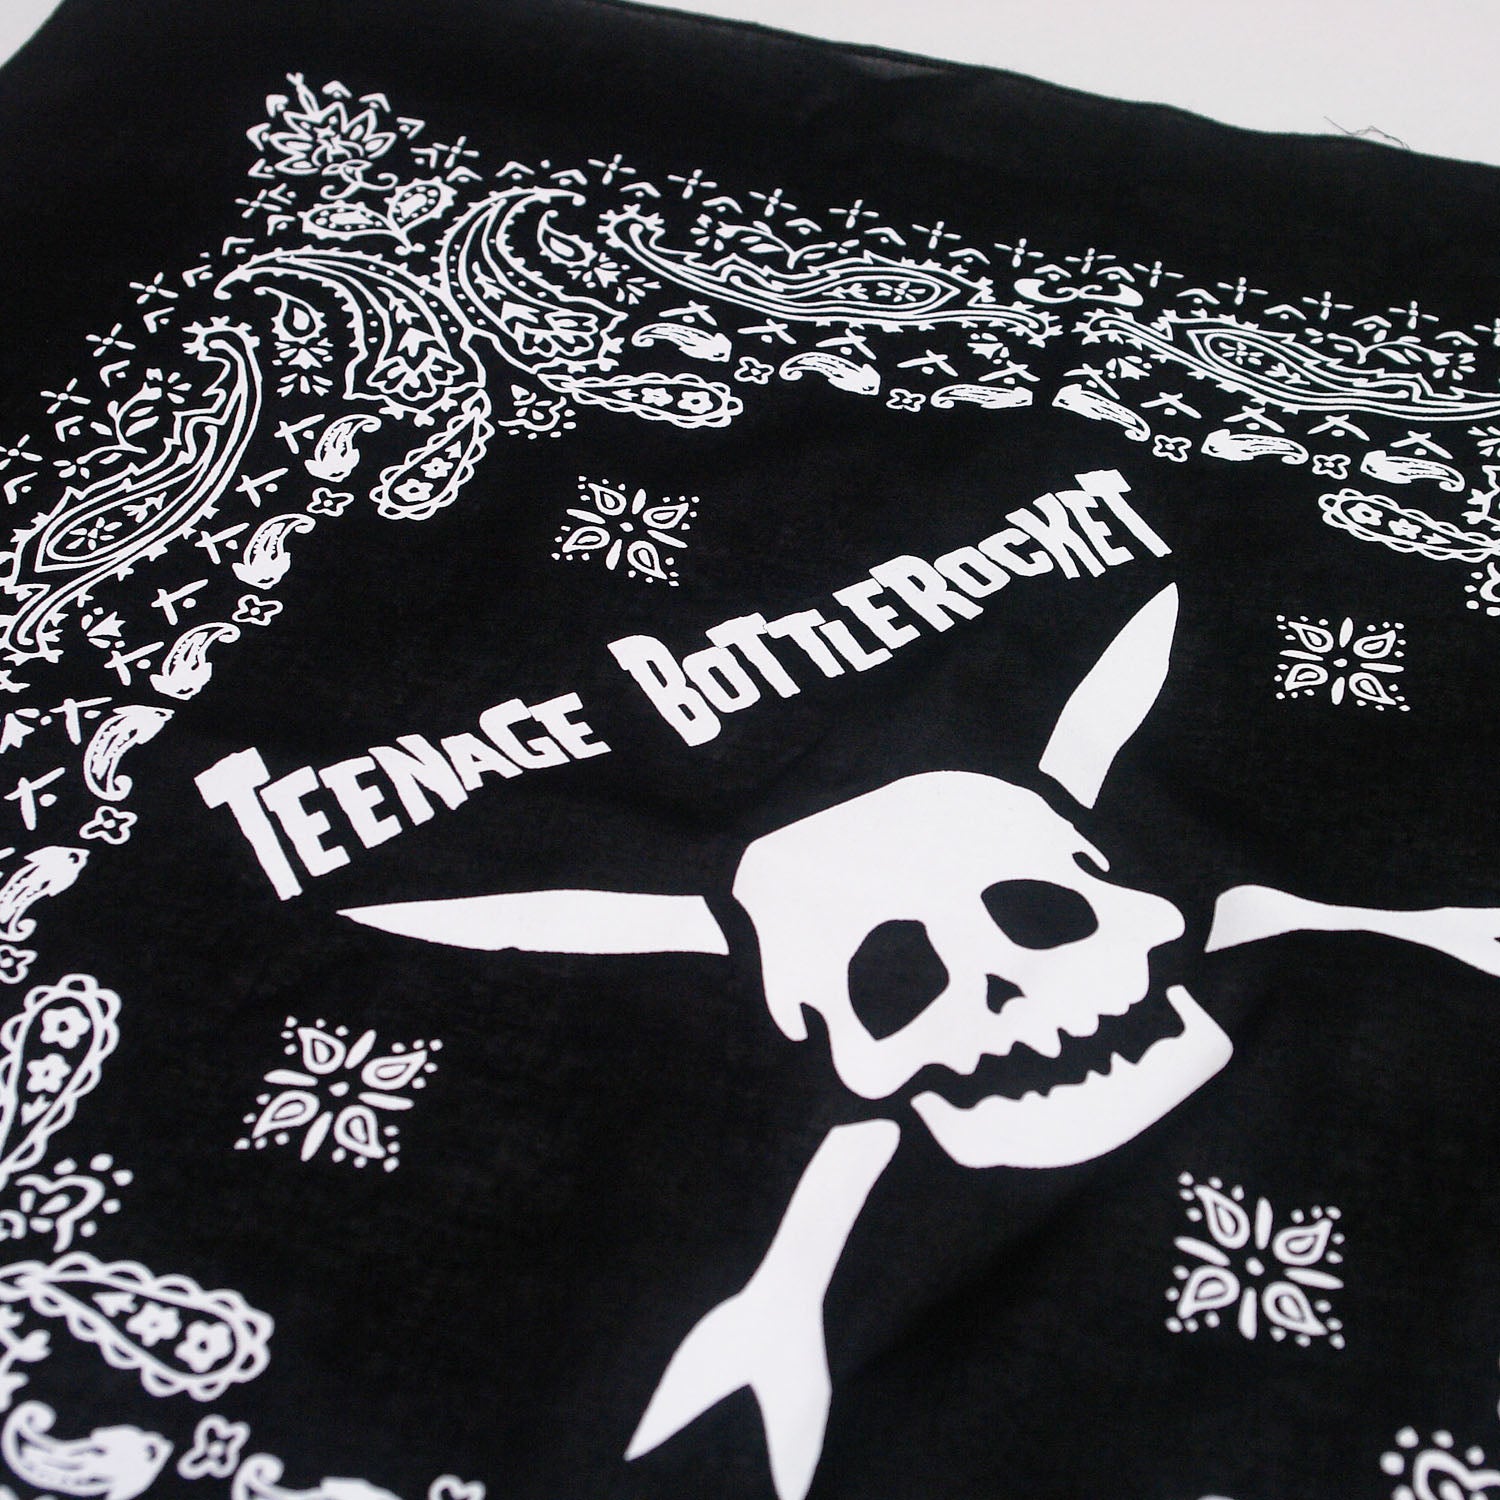 Up close Image of a black bandana against a white background. The bandana says teenage bottlerocket in the center of it in white, and below that is their logo of a white skull head with cross arrows. Surrounding this image is a paisley pattern in white.